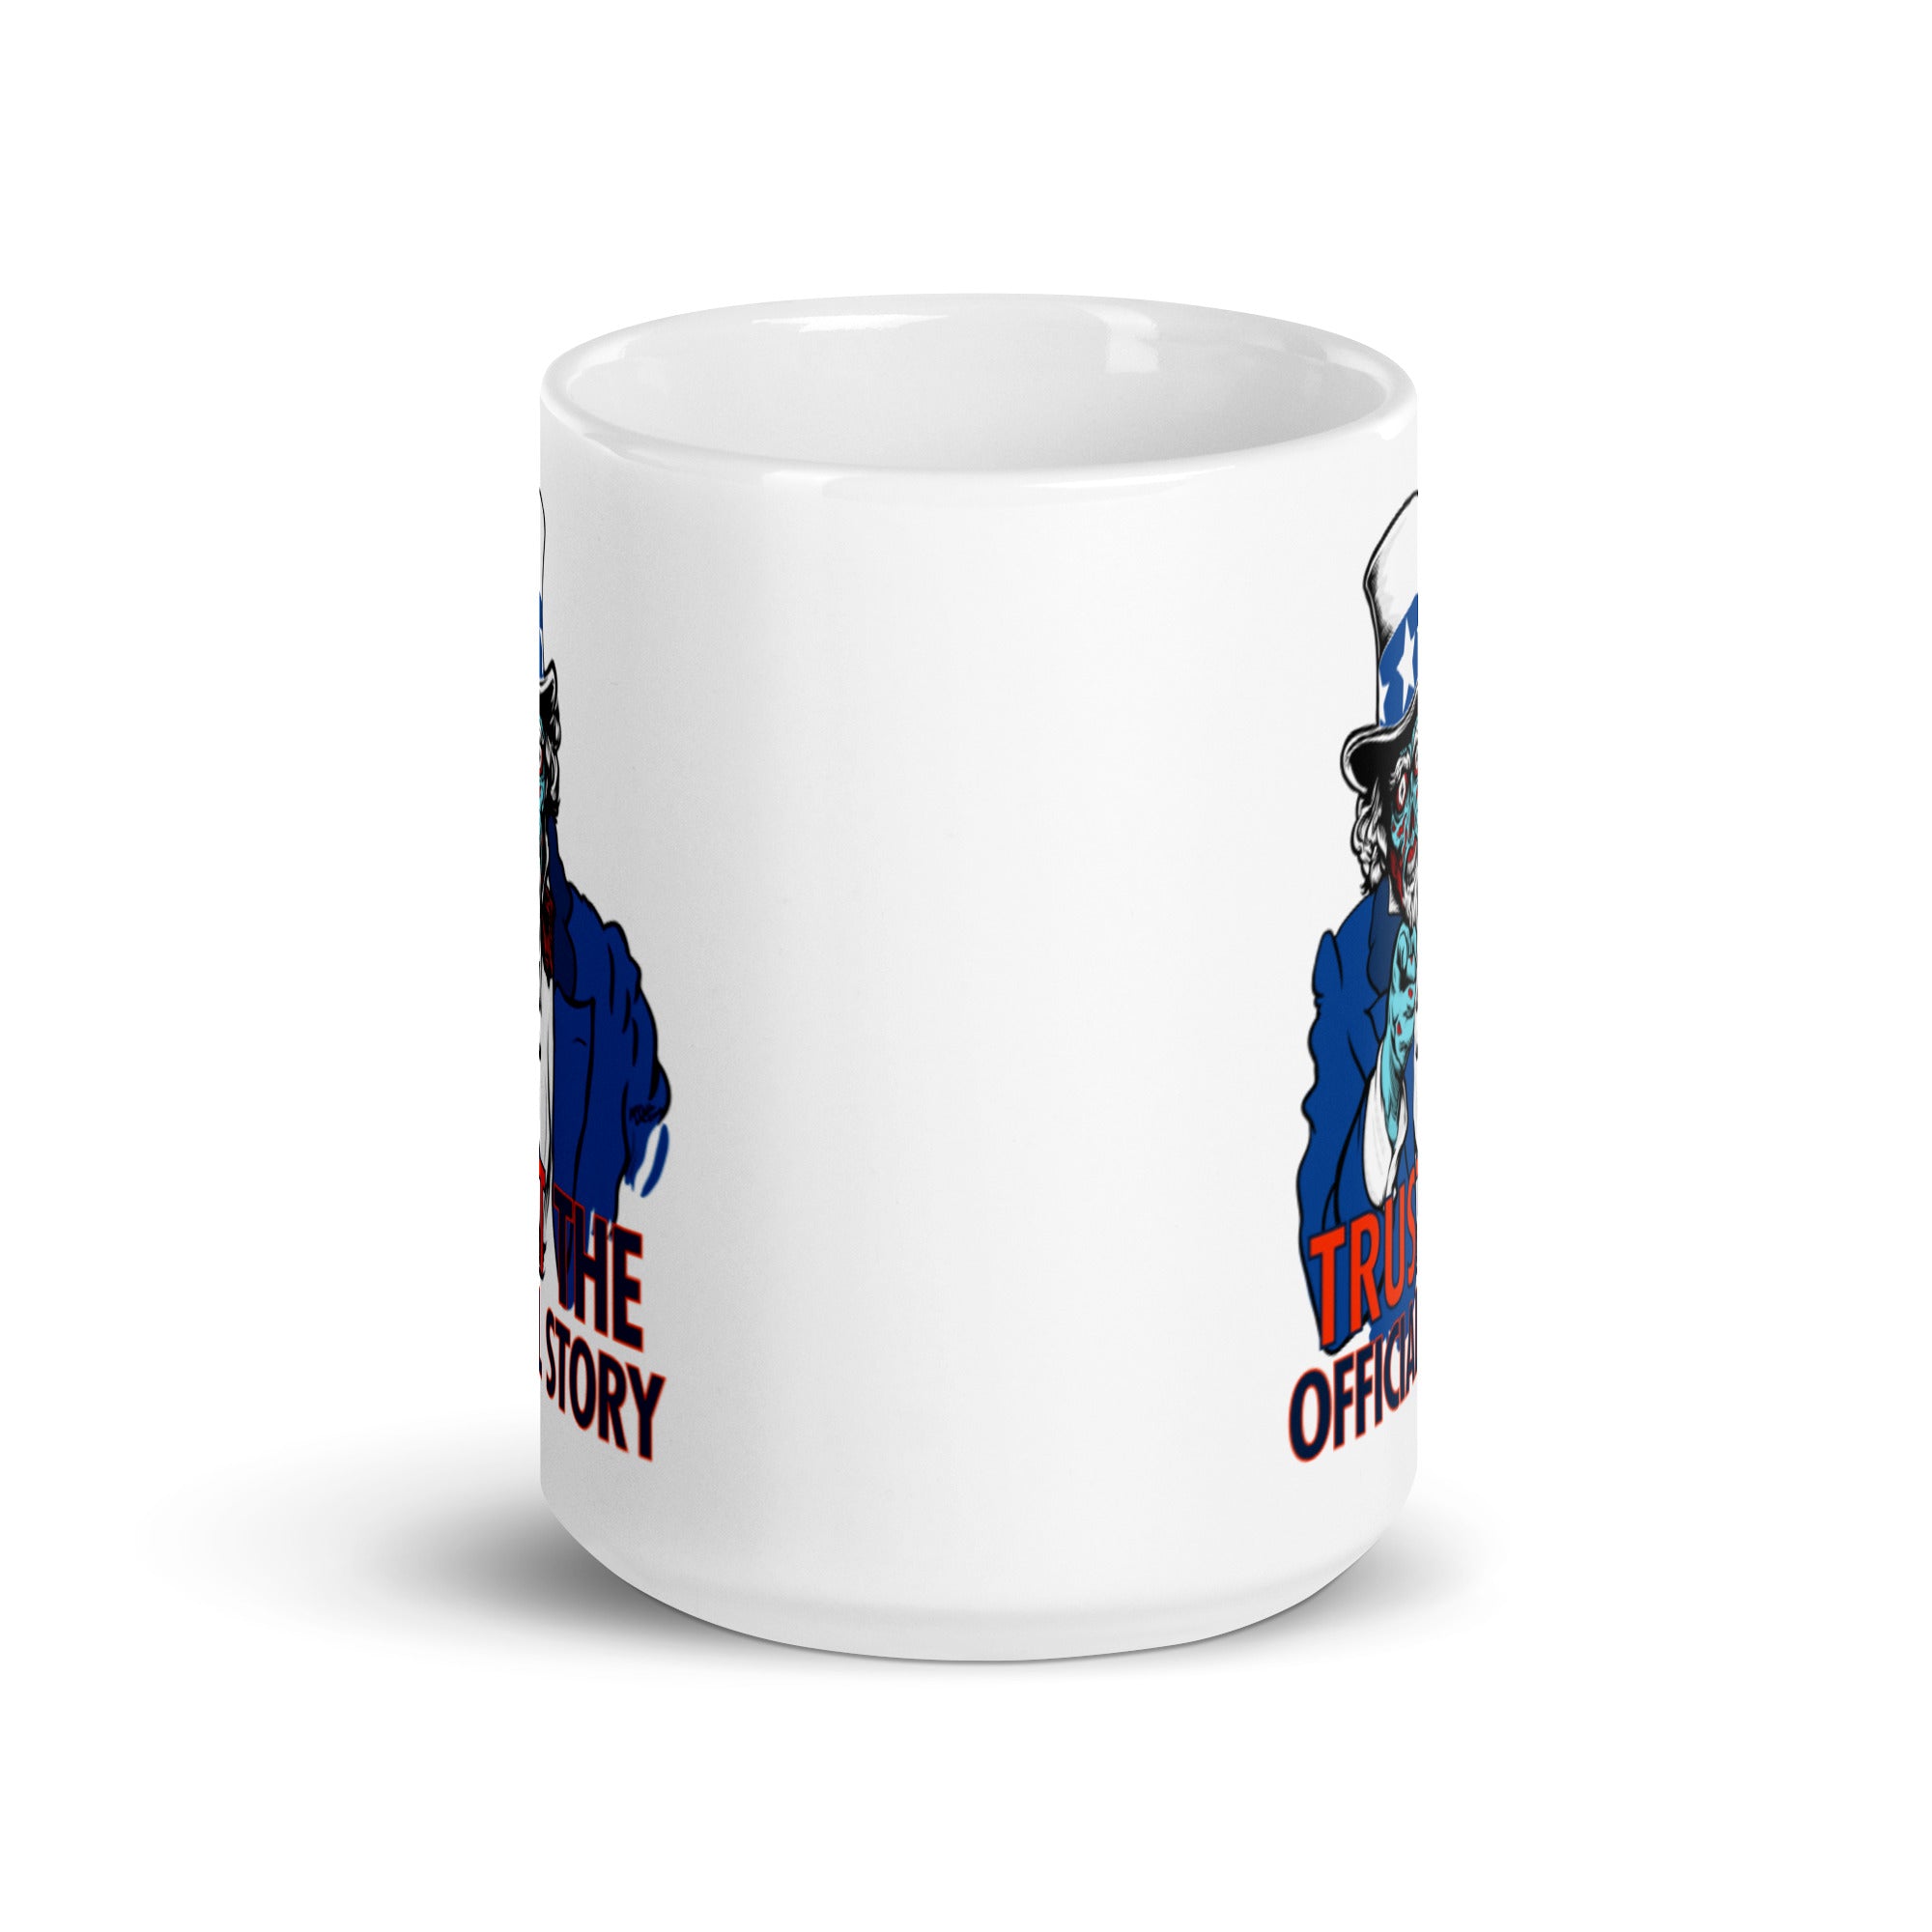 Trust the Official Story Uncle Sam They Live Alien Coffee Mug